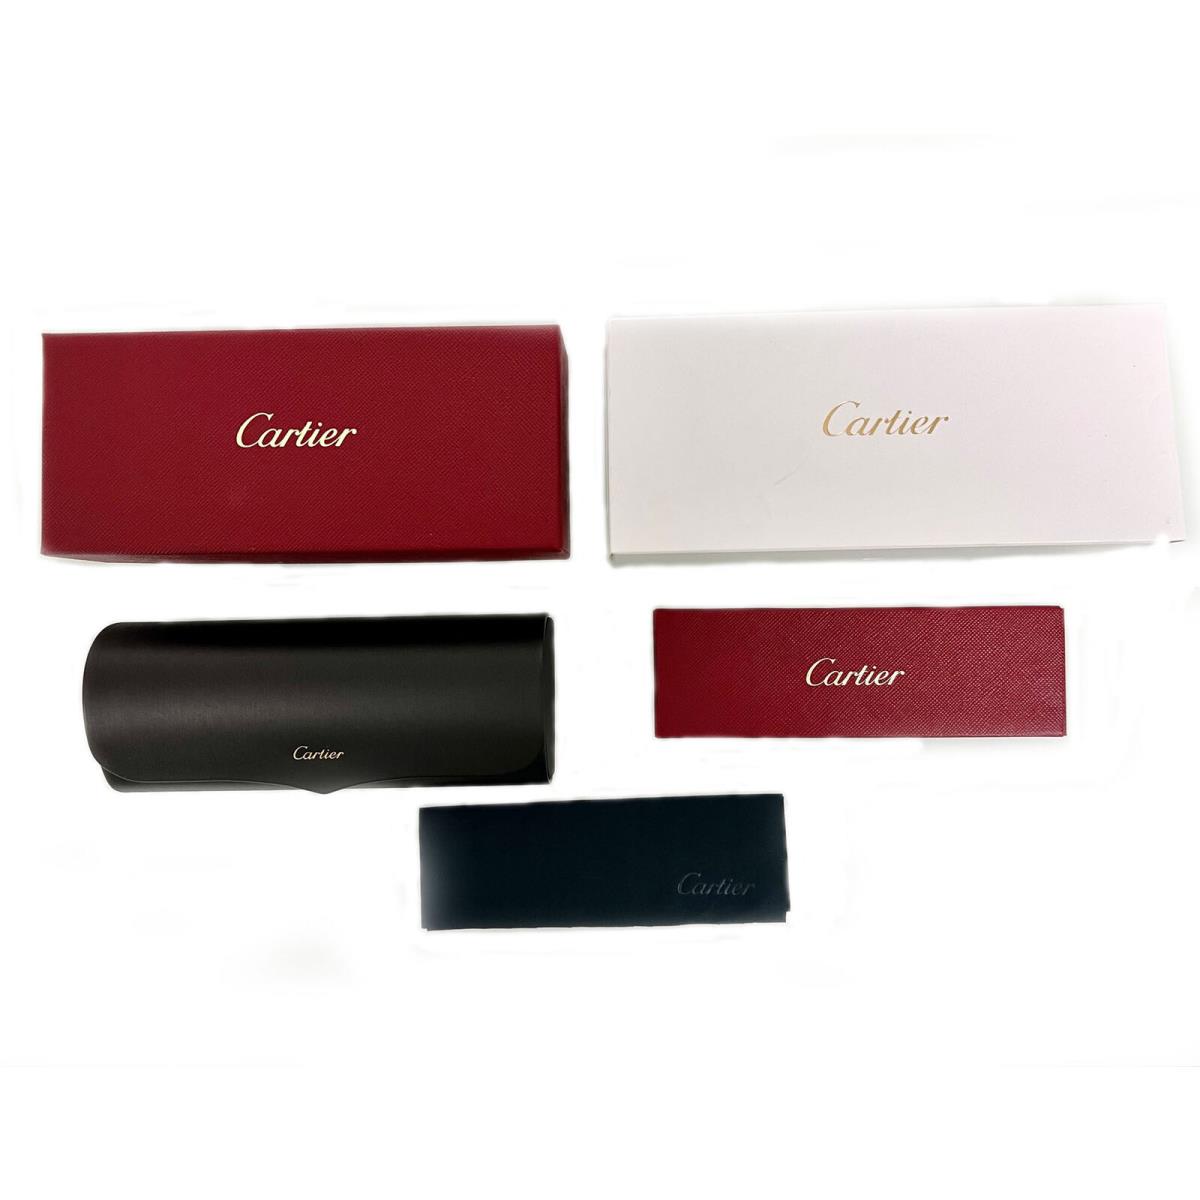 Cartier CT0452oA-004 Red Red Eyeglasses